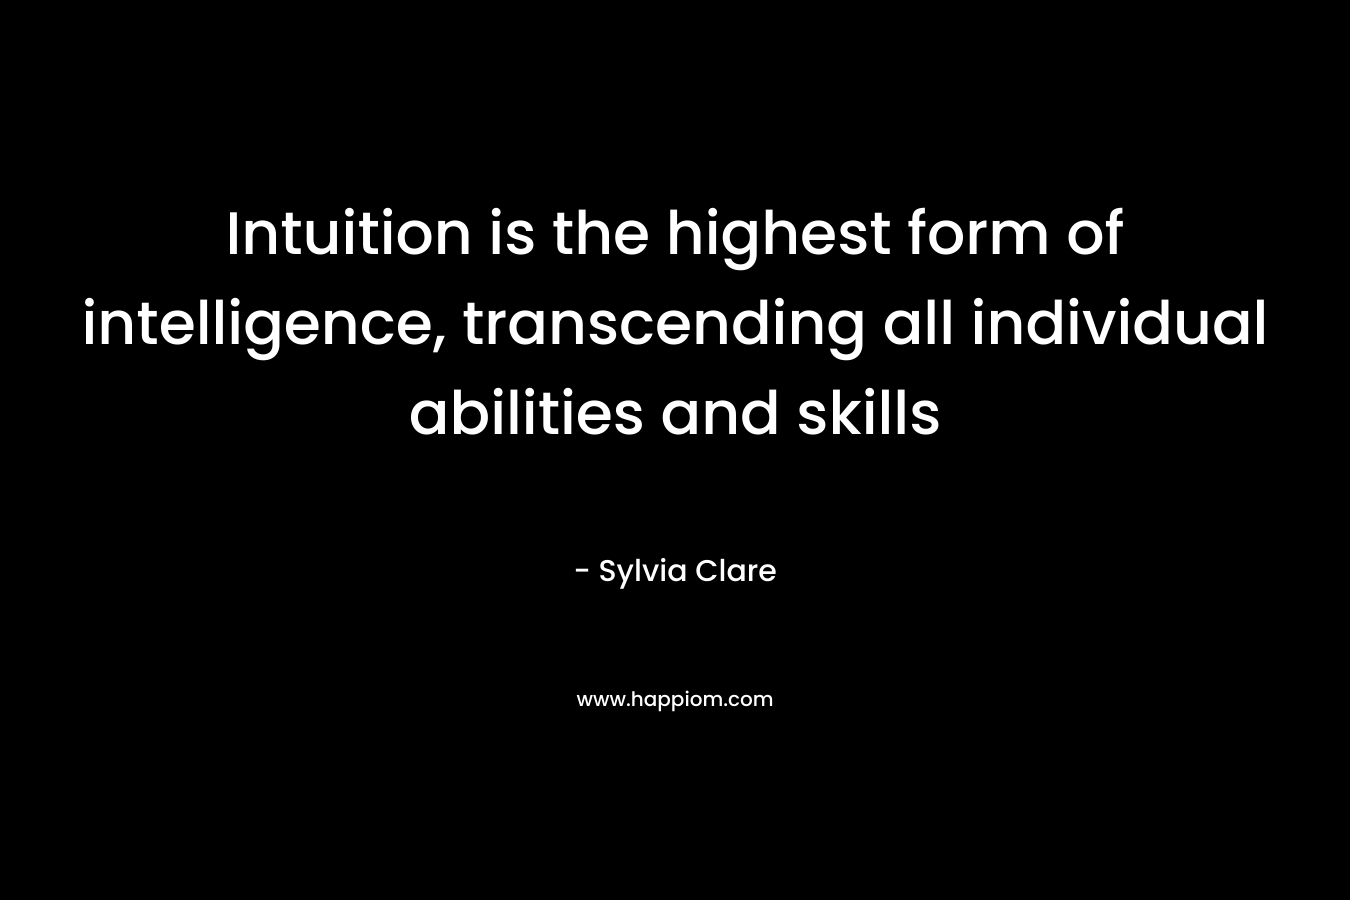 Intuition is the highest form of intelligence, transcending all individual abilities and skills